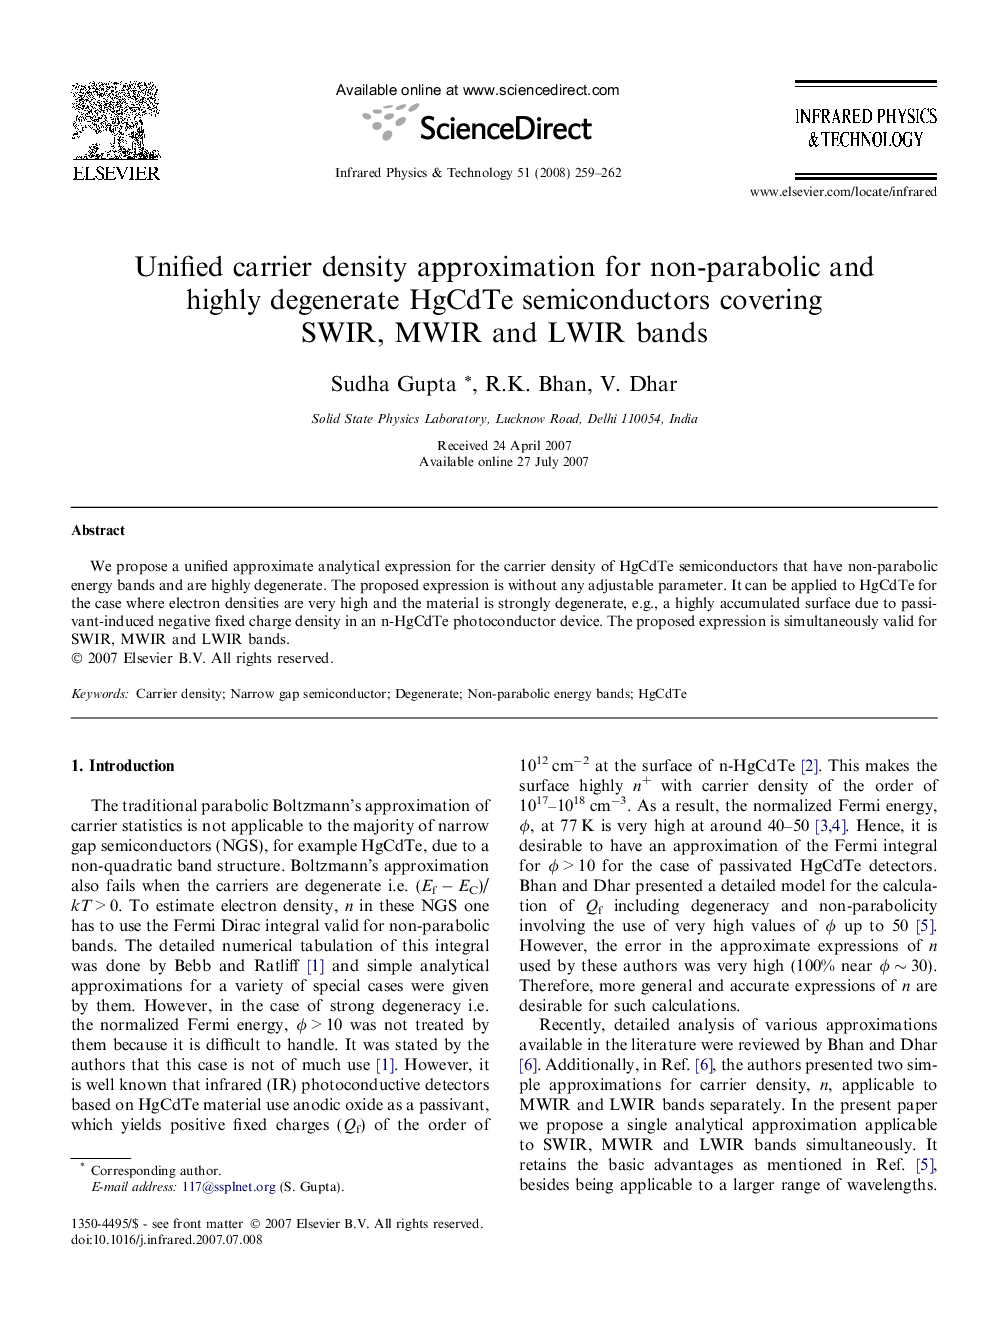 Unified carrier density approximation for non-parabolic and highly degenerate HgCdTe semiconductors covering SWIR, MWIR and LWIR bands